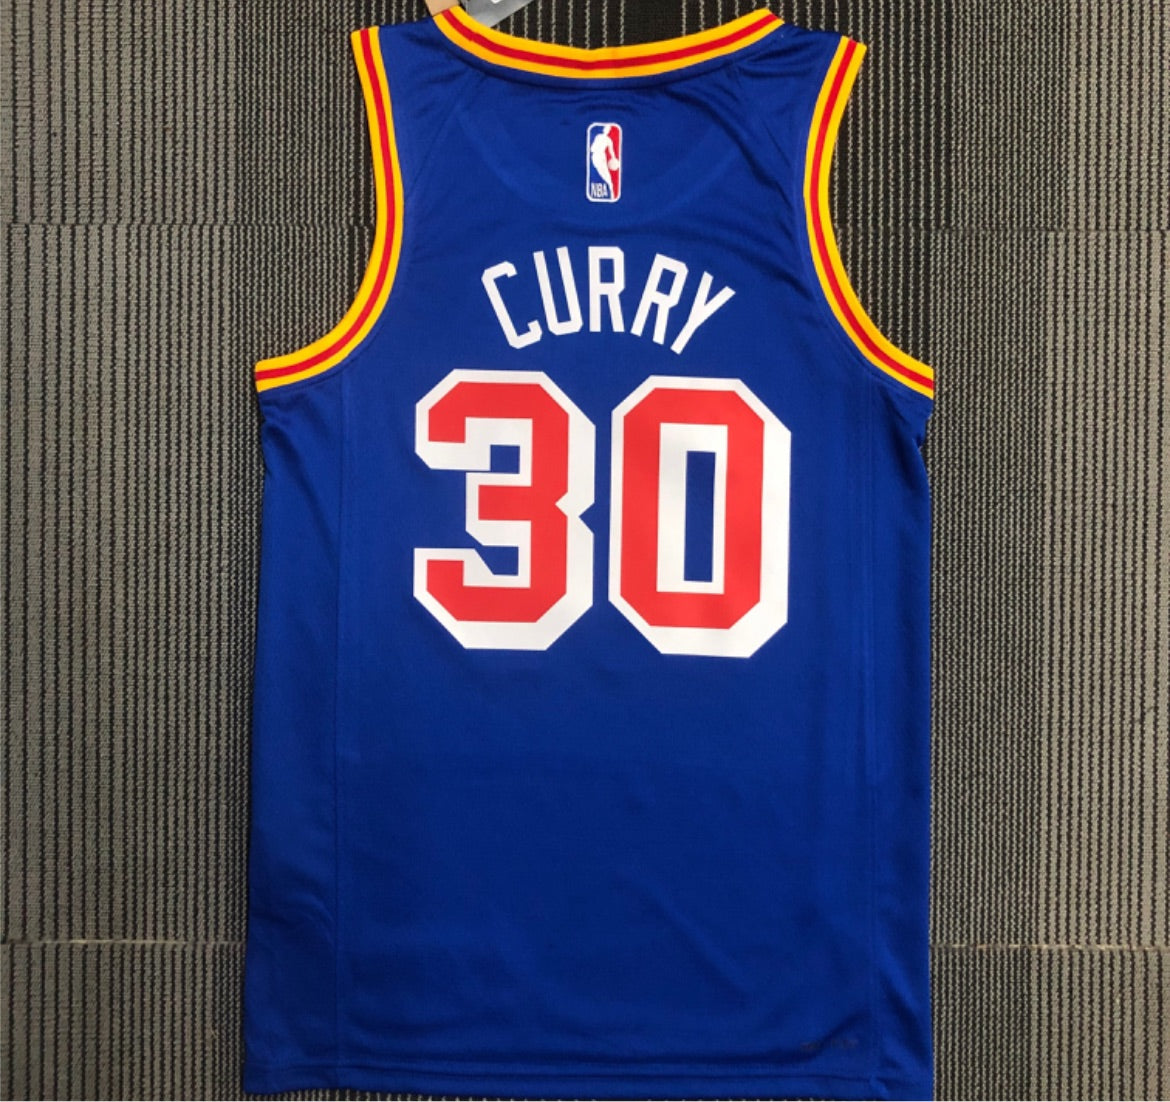 steph curry jersey with sleeves